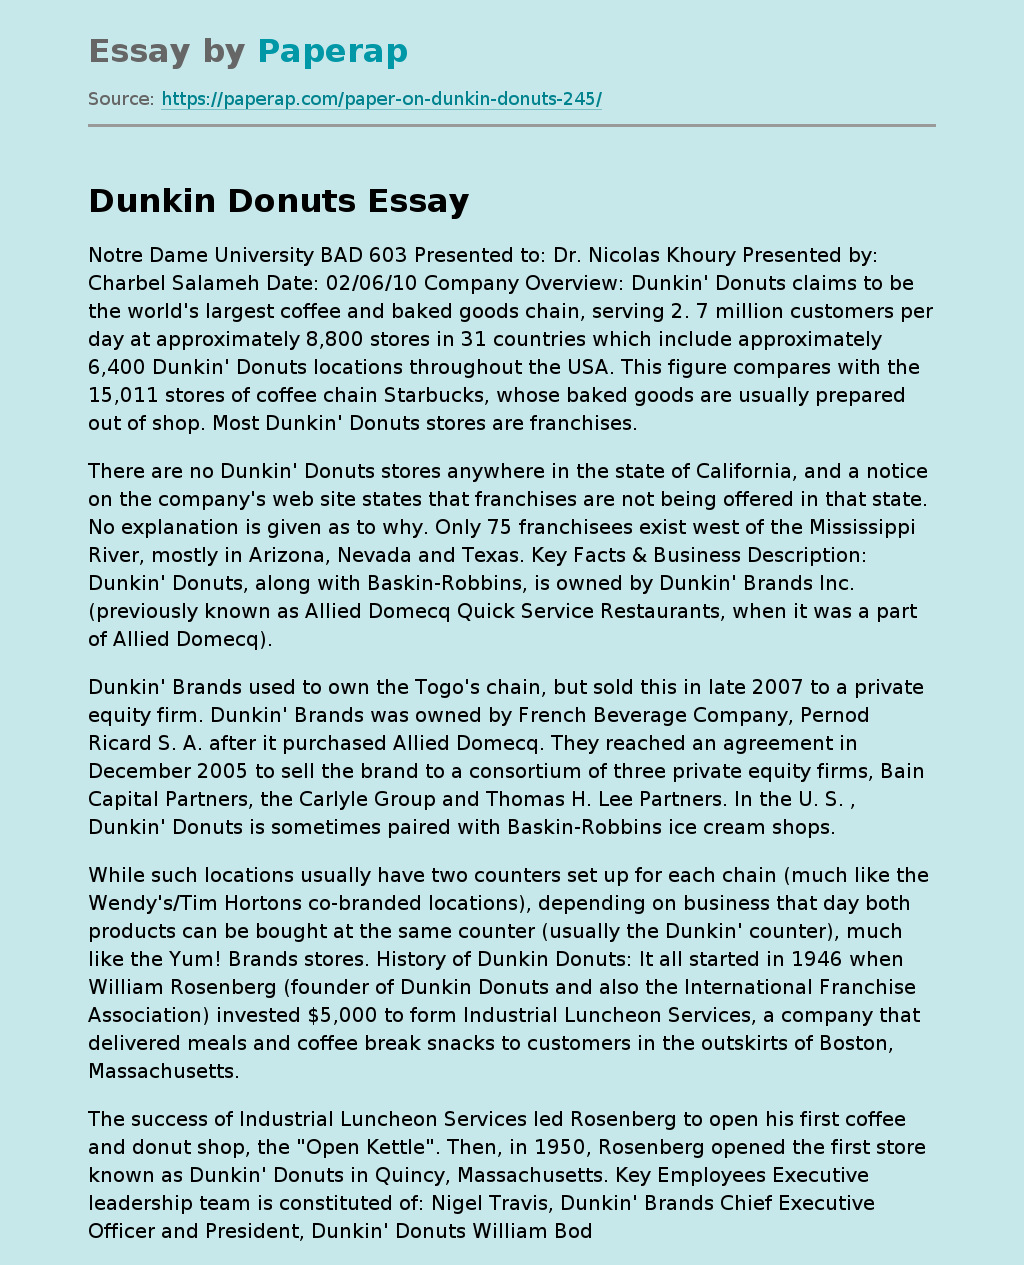 Company Overview: Dunkin Donuts